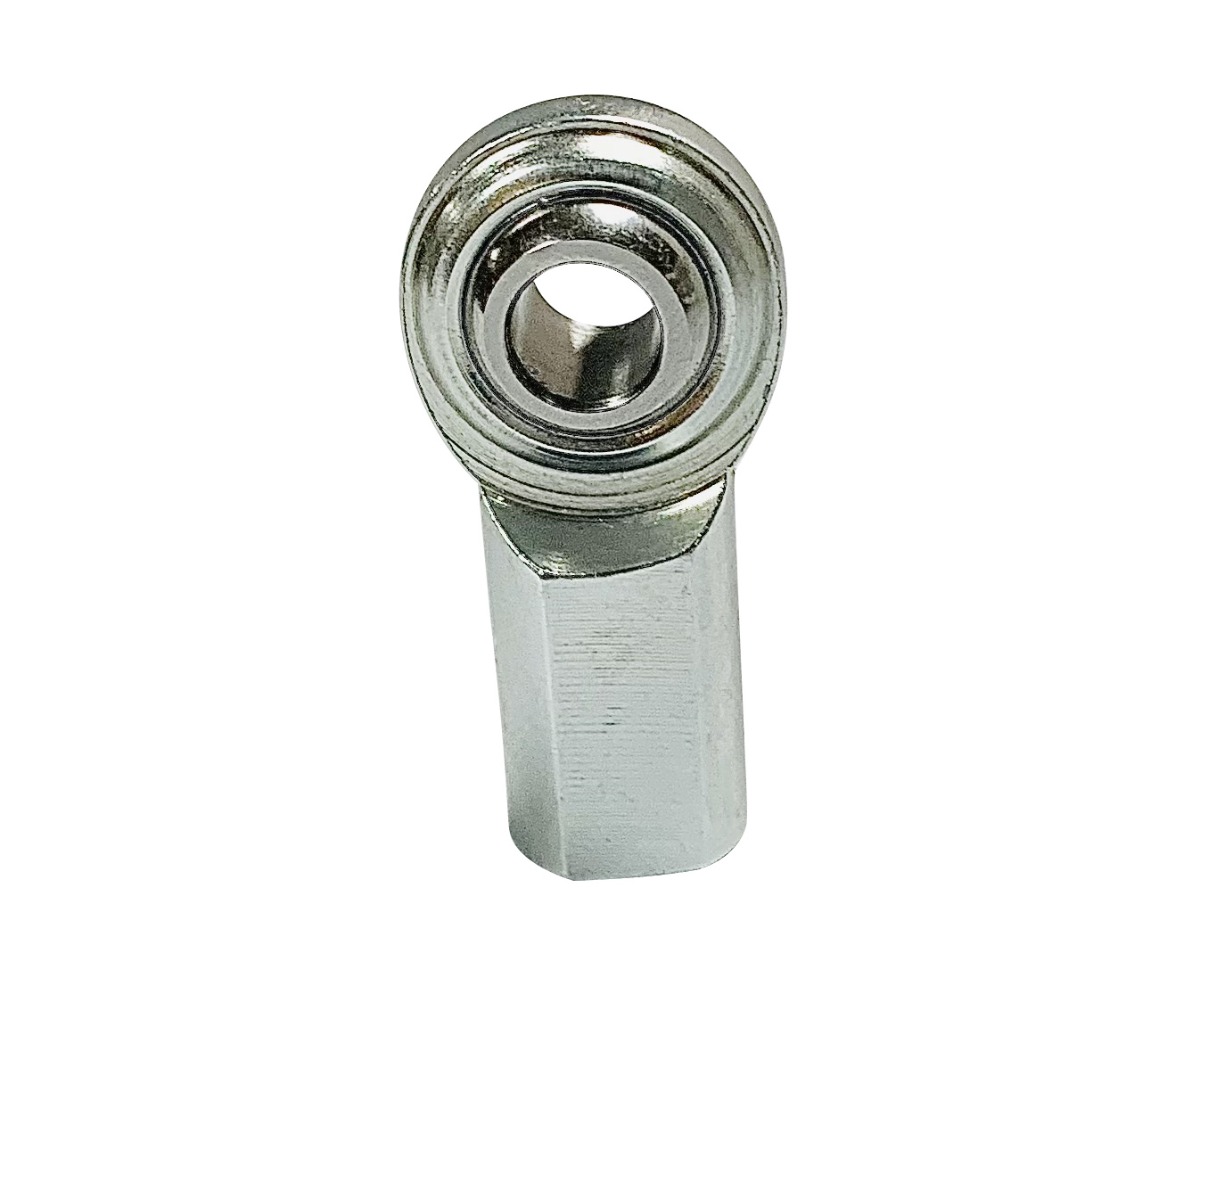 Details about   NEW HEIM HF7 ROD END BEARING 